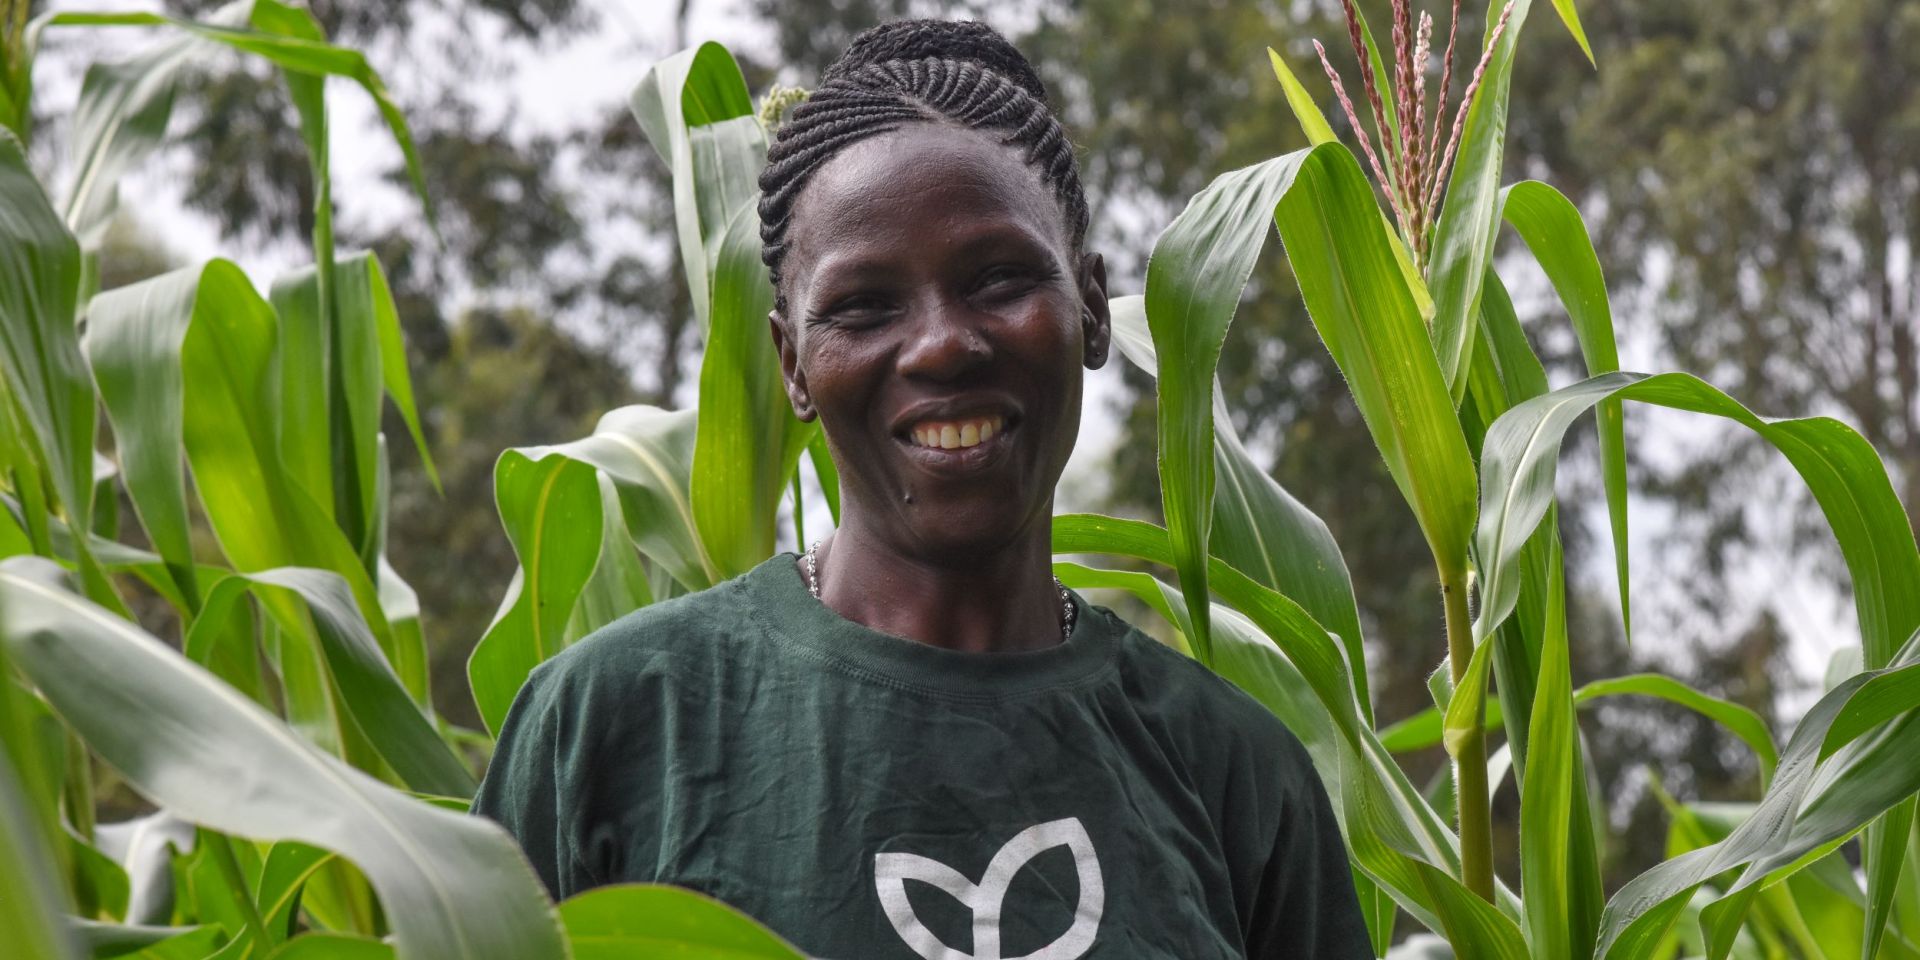 A smiling woman farmer stands in her field of maize